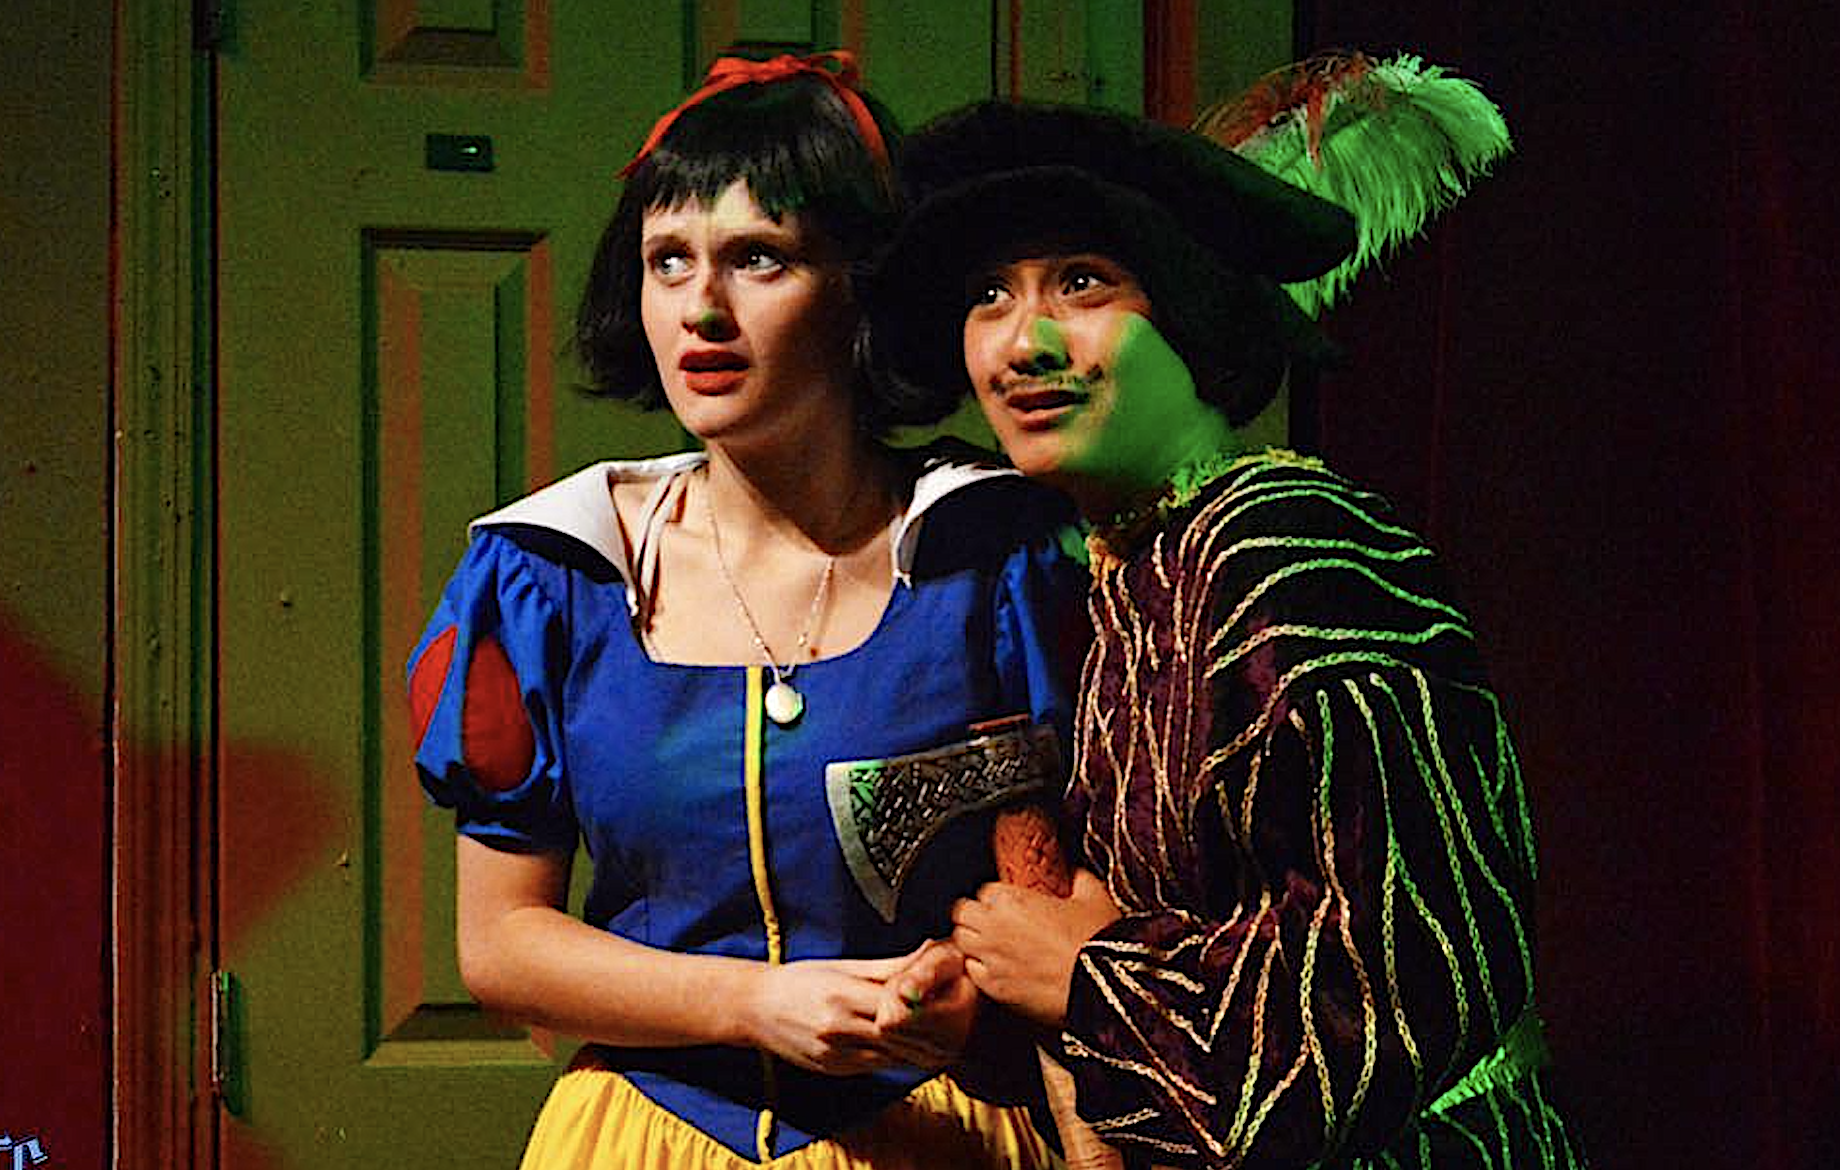 Last weekend for Snow White at Sutter Street Theatre